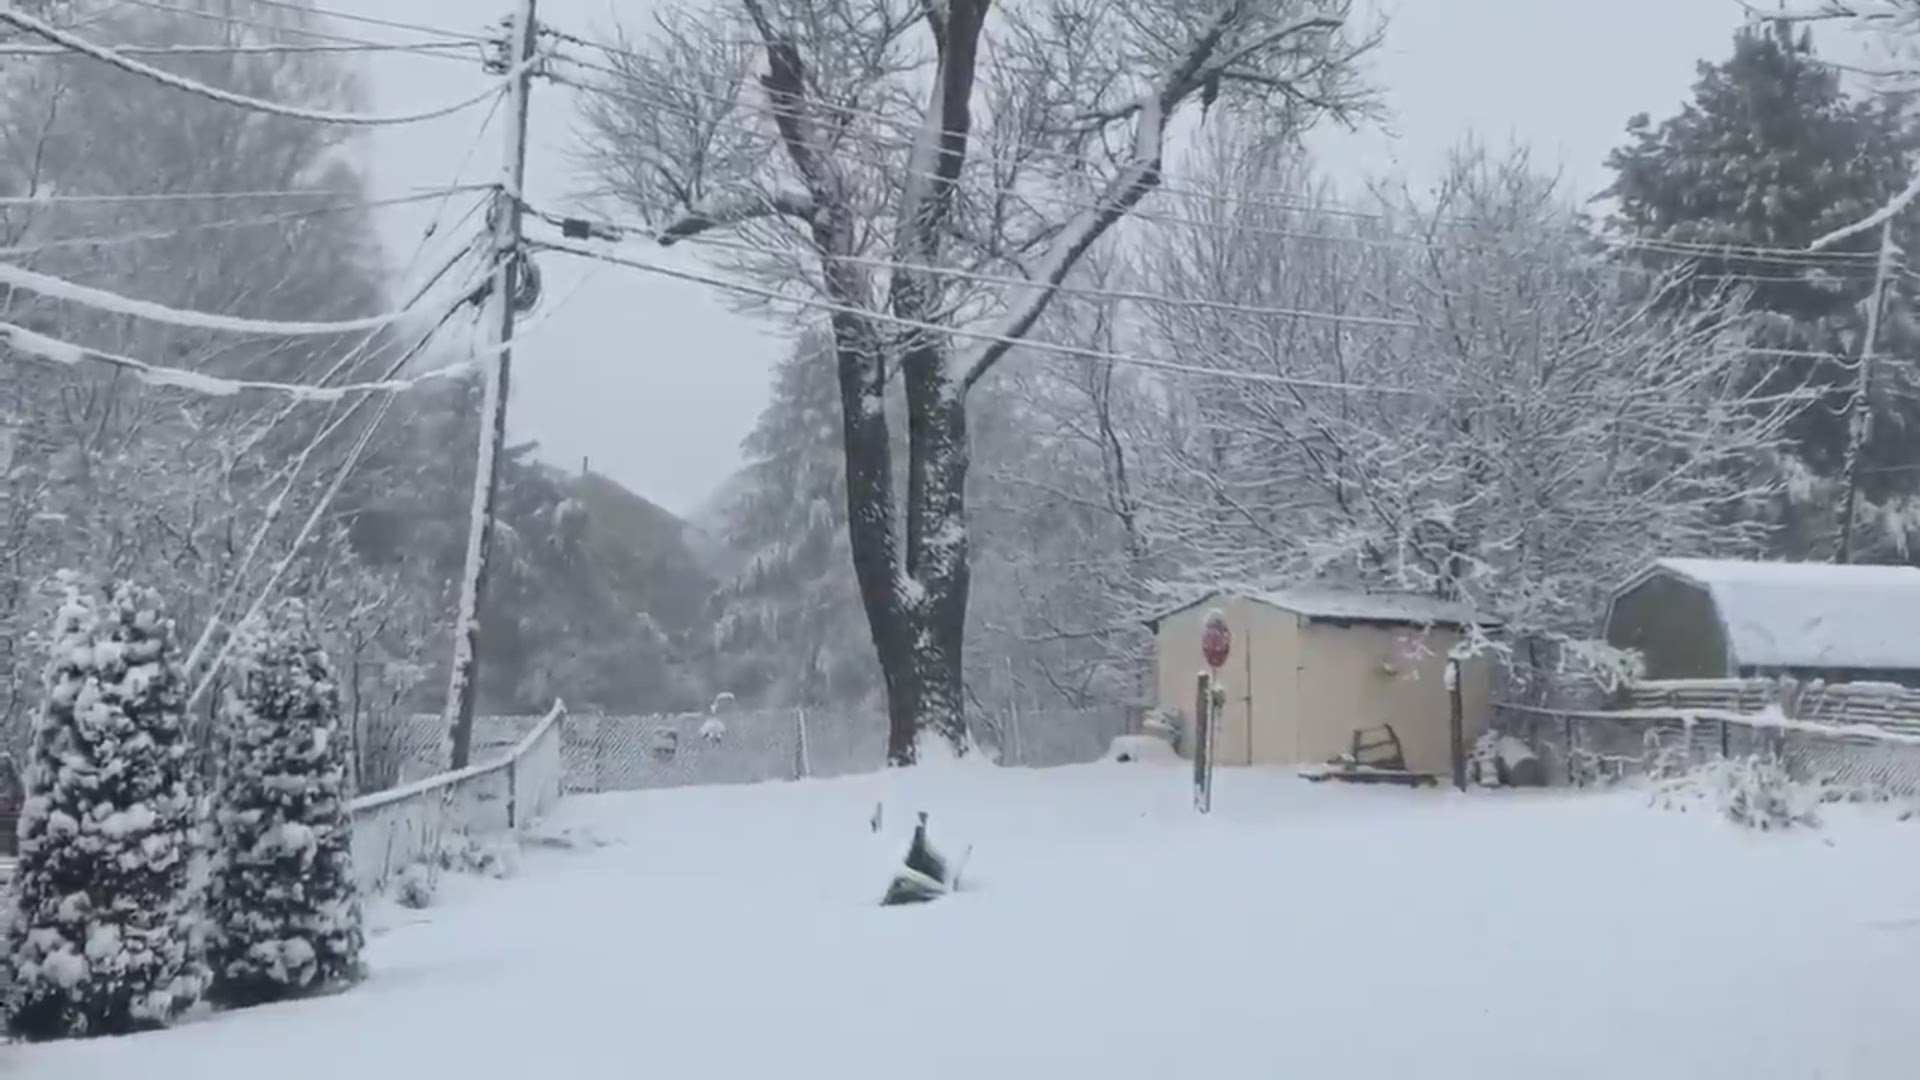 Listen and hear the thundersnow in Owings Mill, Maryland during a snow squall on Wednesday, January 8th.